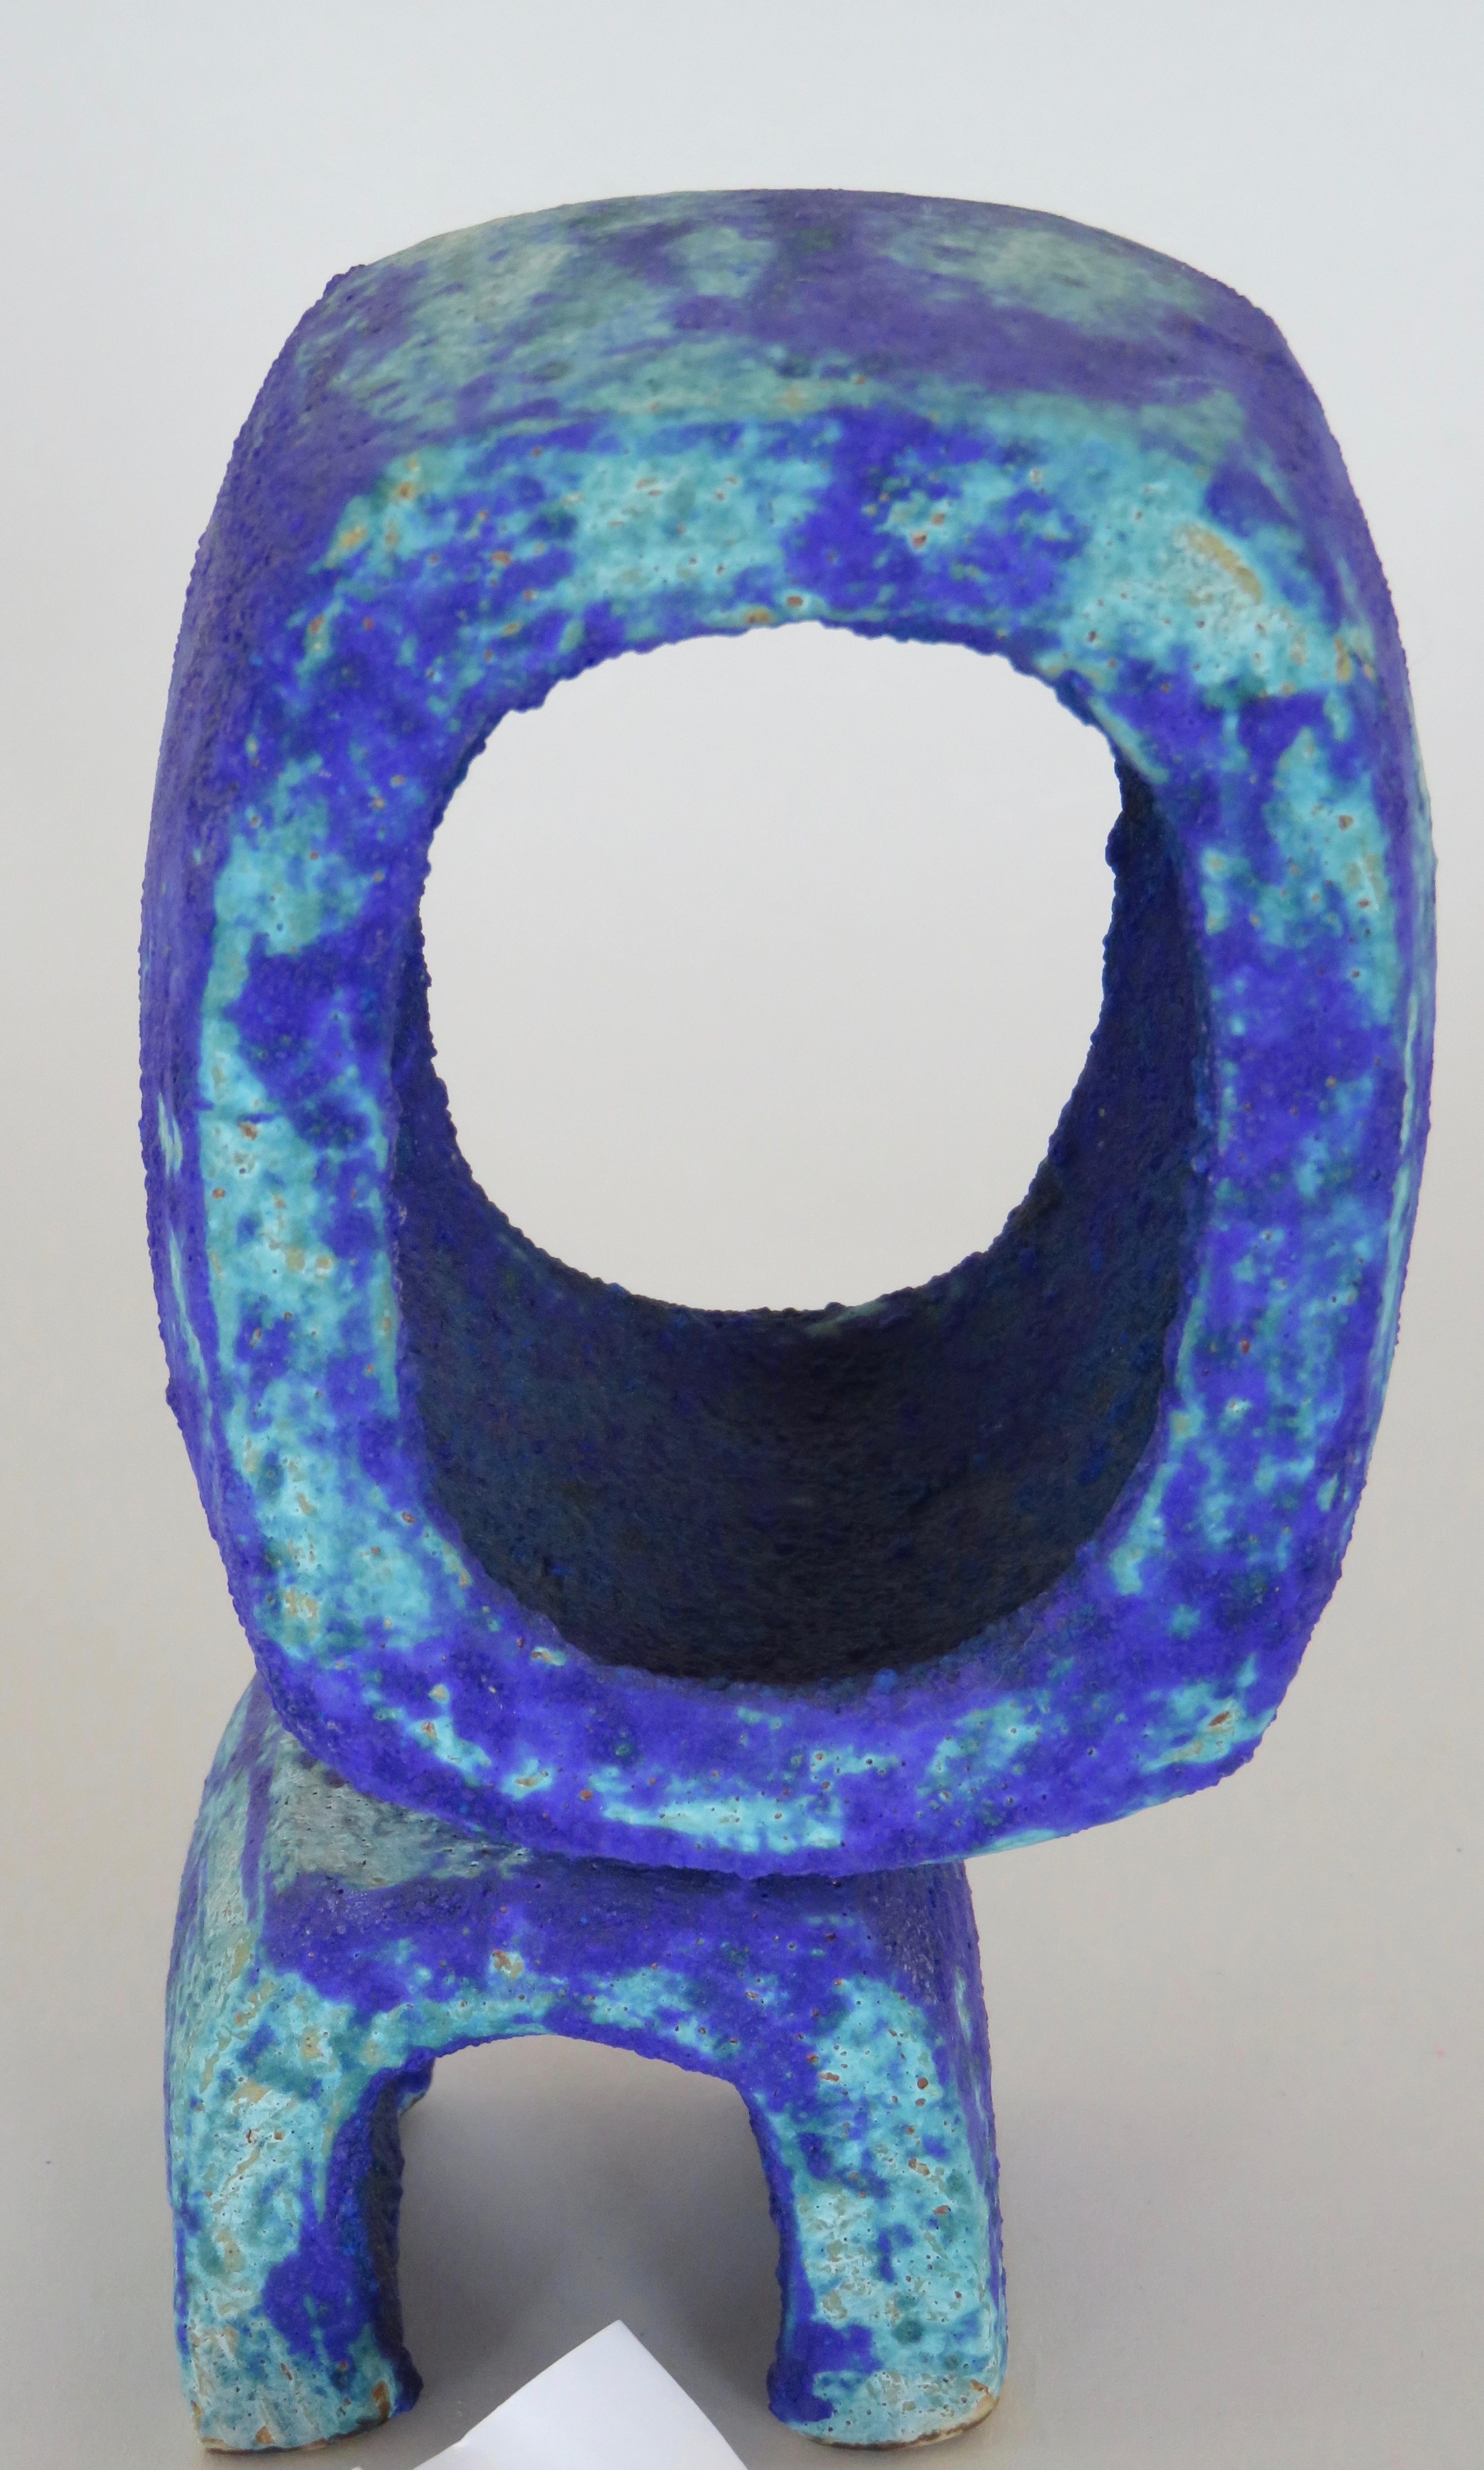 Small Hand Built Standing Oval Ceramic Sculpture in Turquoise and Deep Blue #3 (Glasiert)